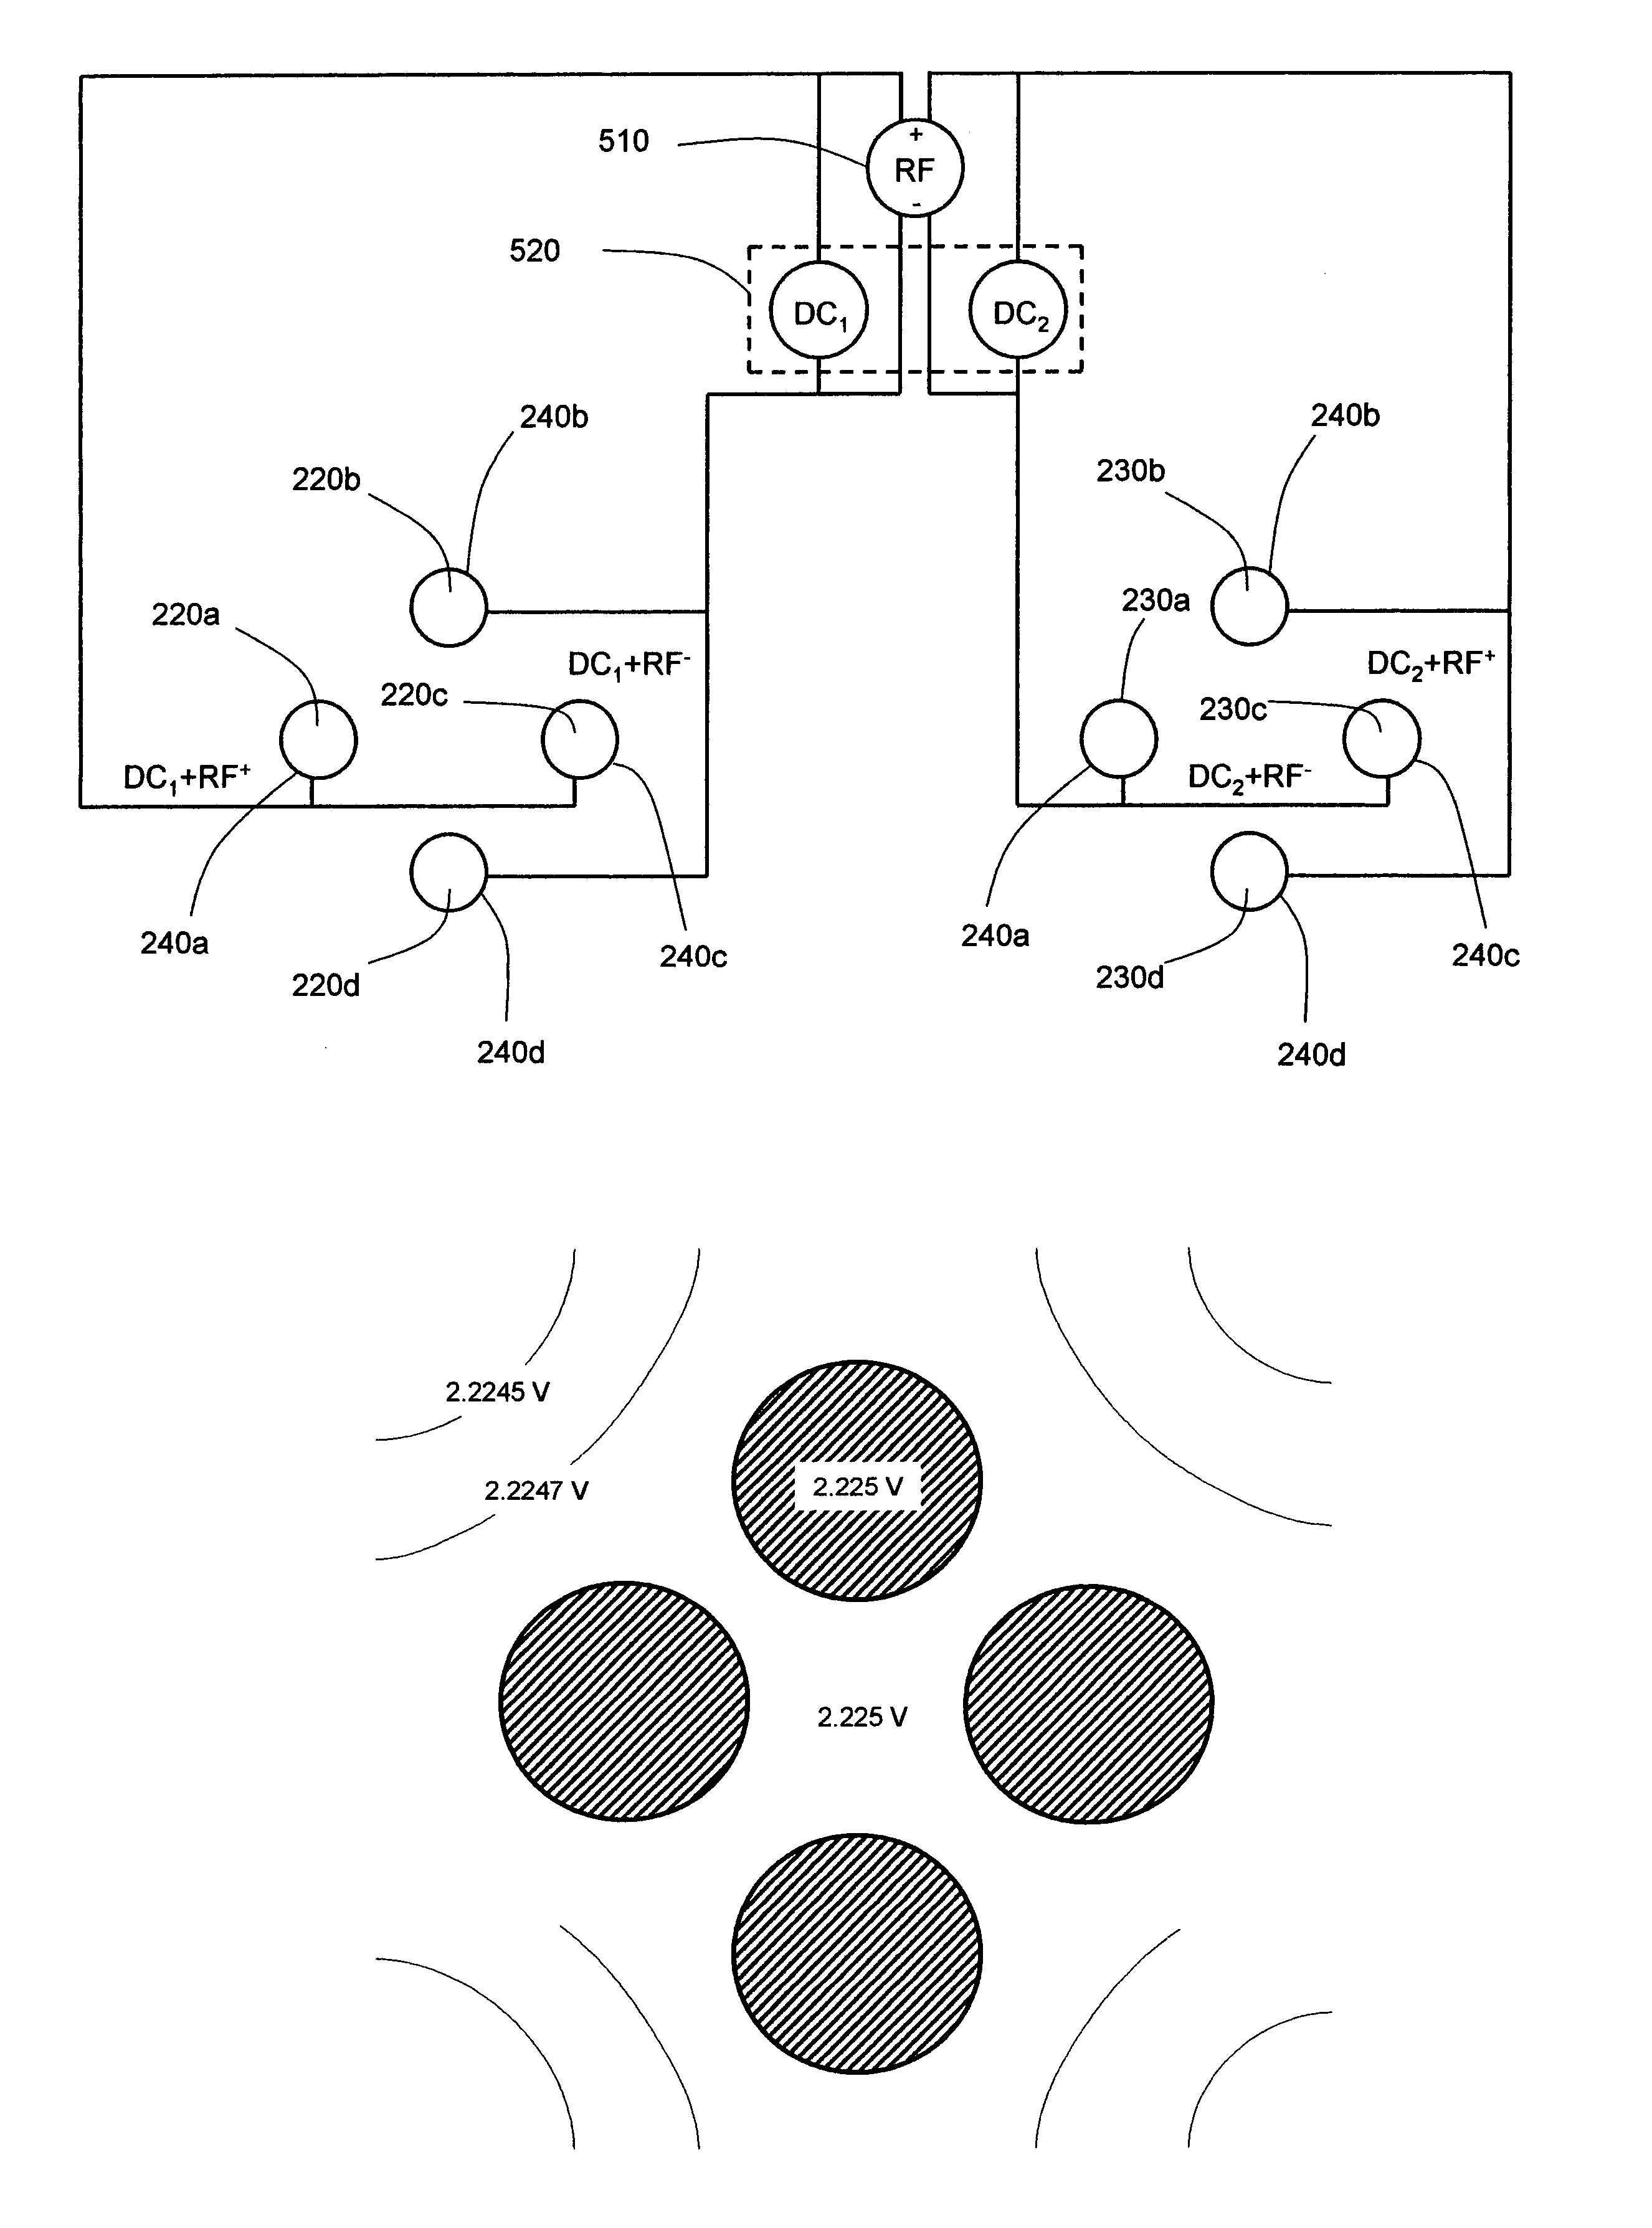 Generation of combination of RF and axial DC electric fields in an RF-only multipole